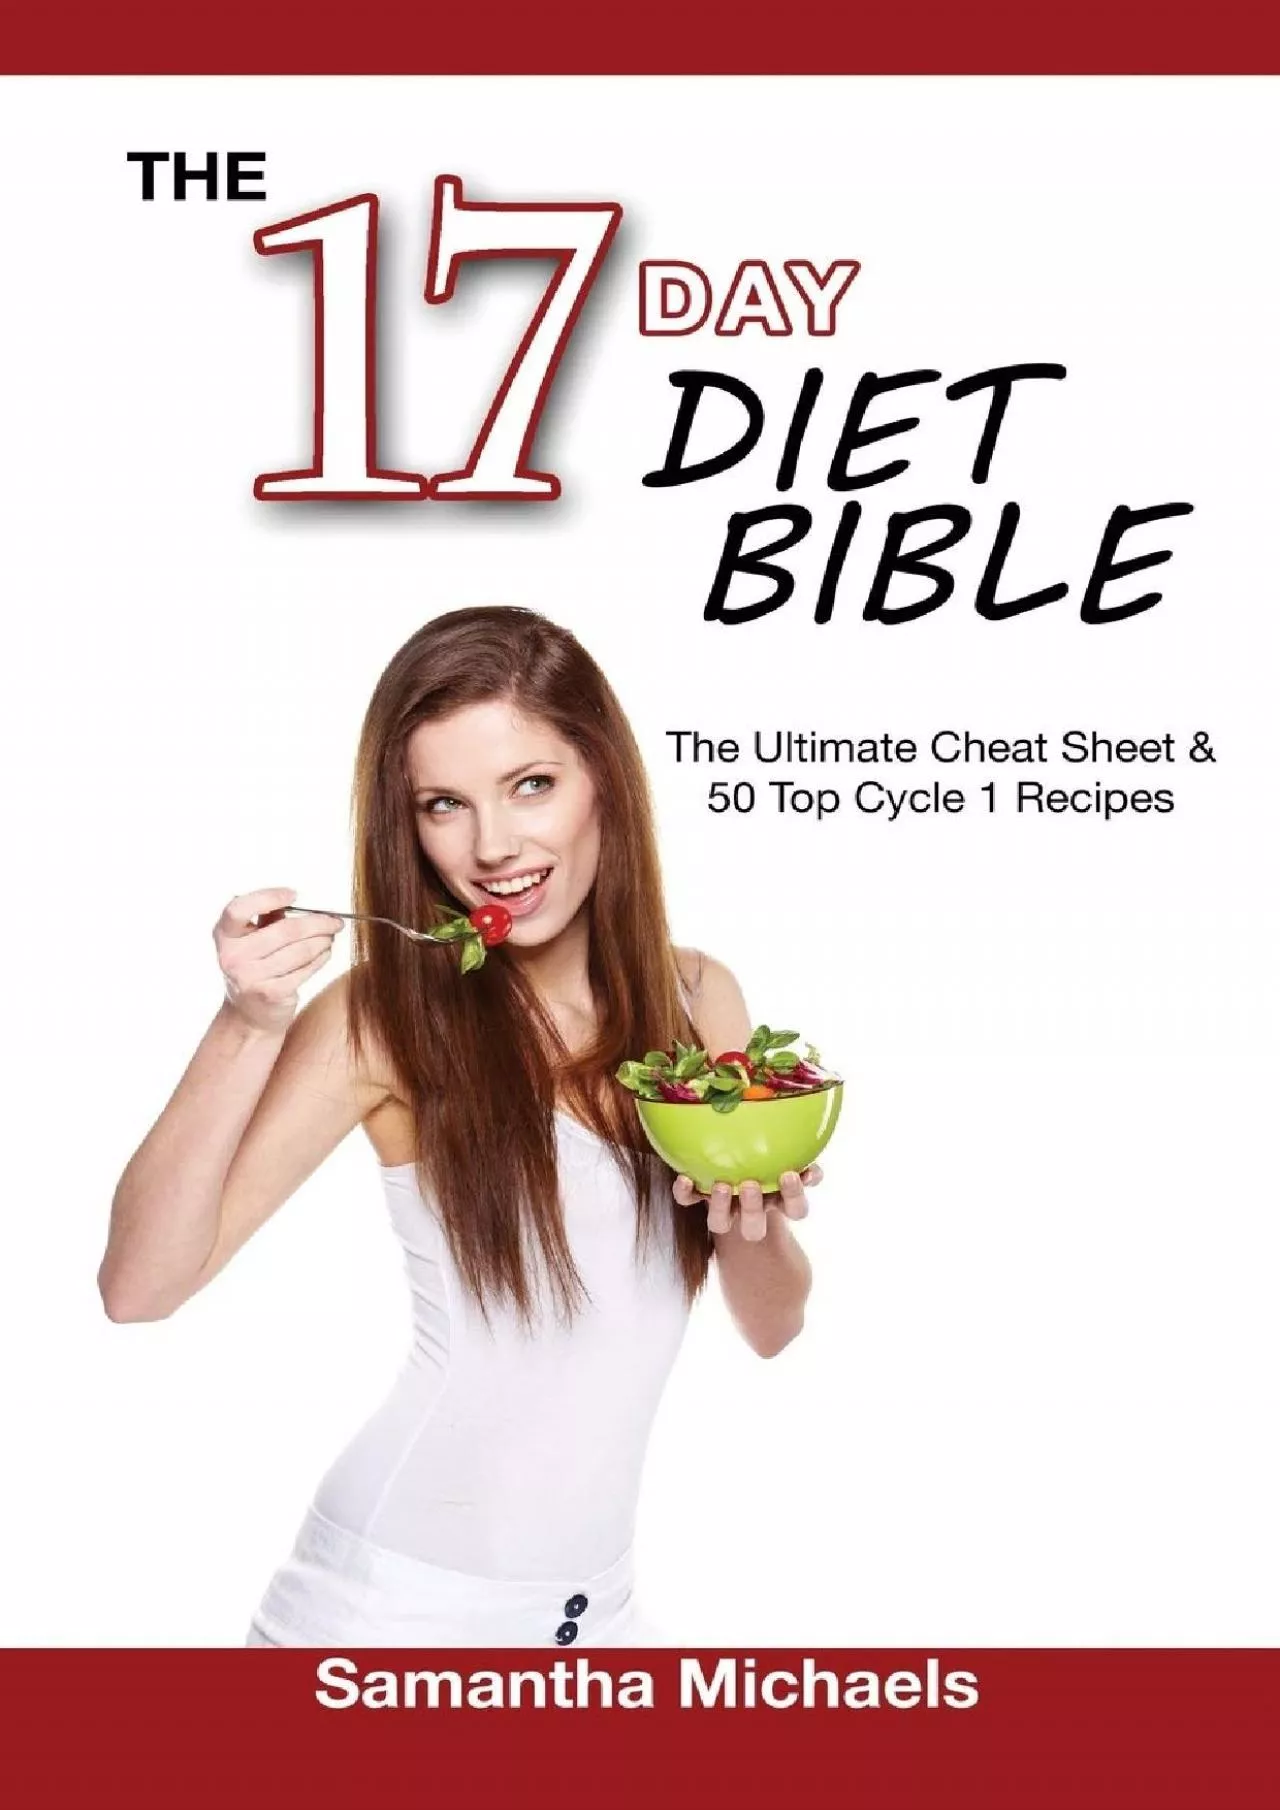 (BOOS)-The 17 Day Diet Bible: The Ultimate Cheat Sheet & 50 Top Cycle 1 Recipes